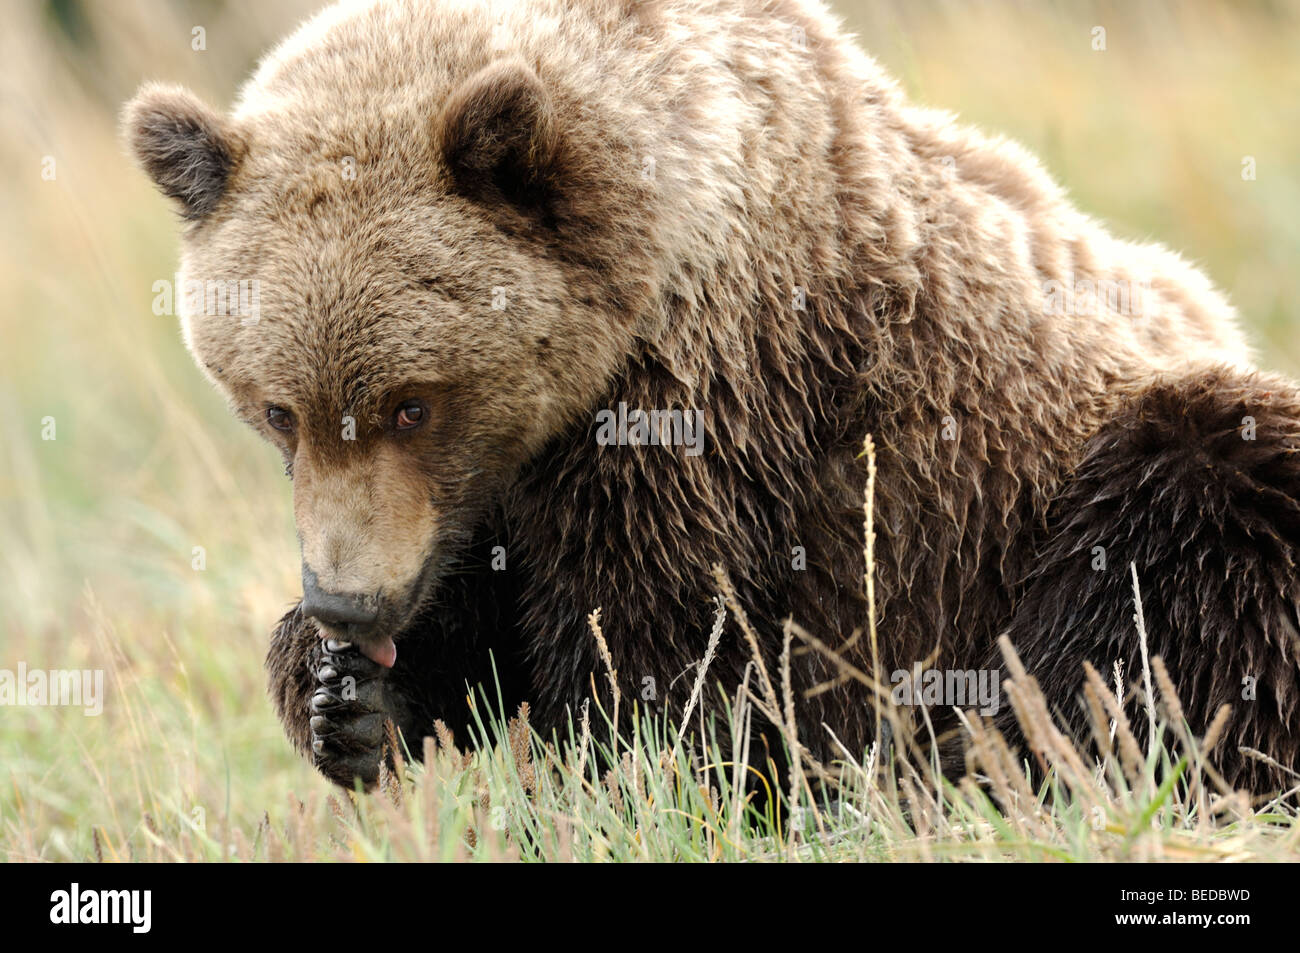 Stock photo of a yearling brown bear washing his paw. Stock Photo